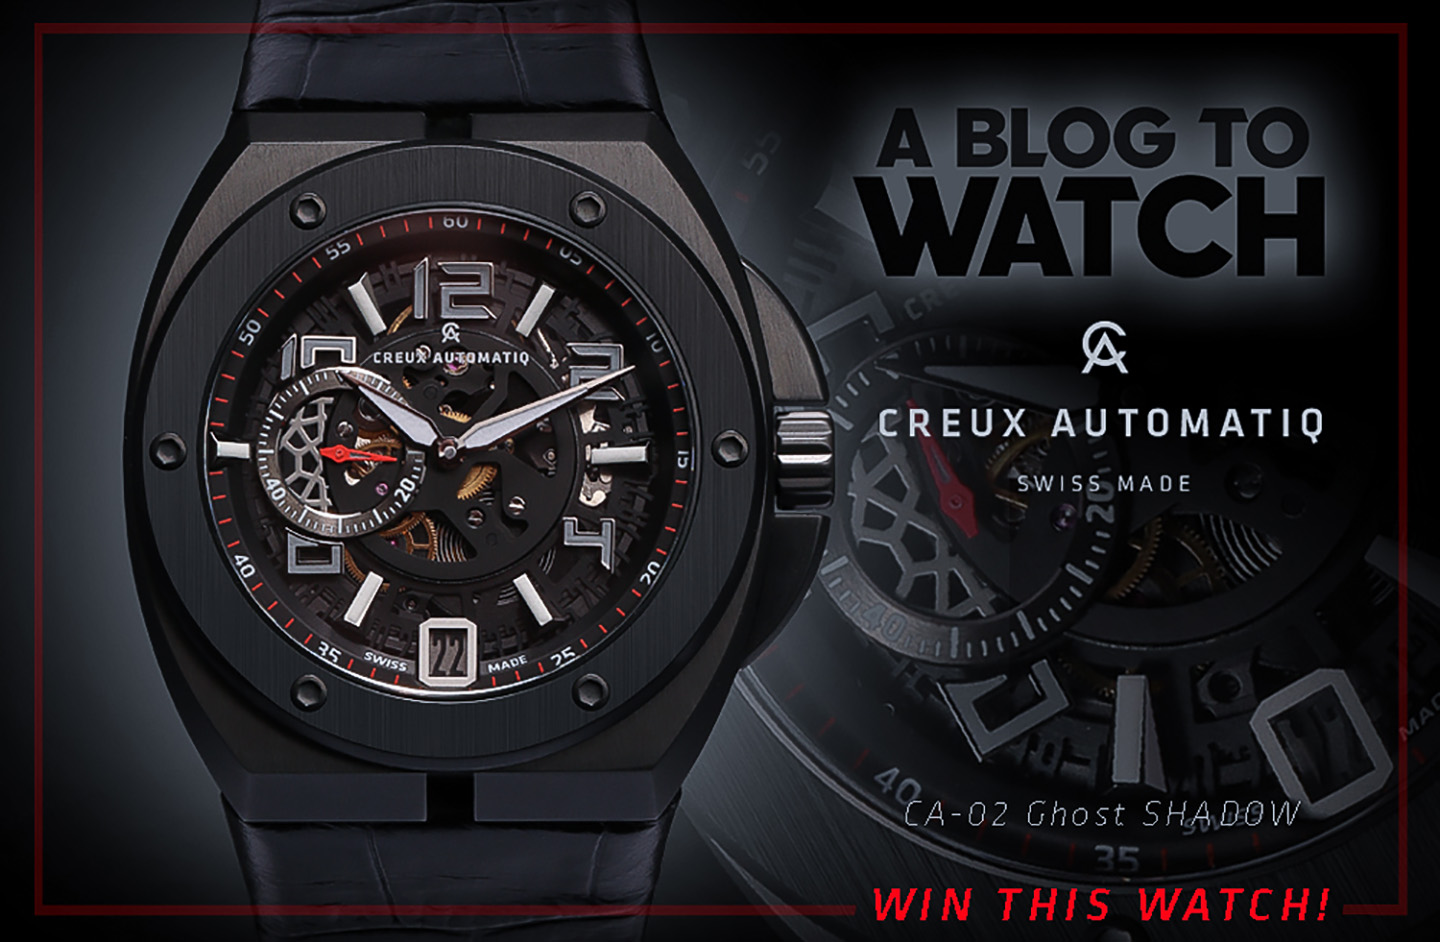 LAST CHANCE: Creux Automatiq CA-02 Ghost Shadow Automatic Watch Giveaway